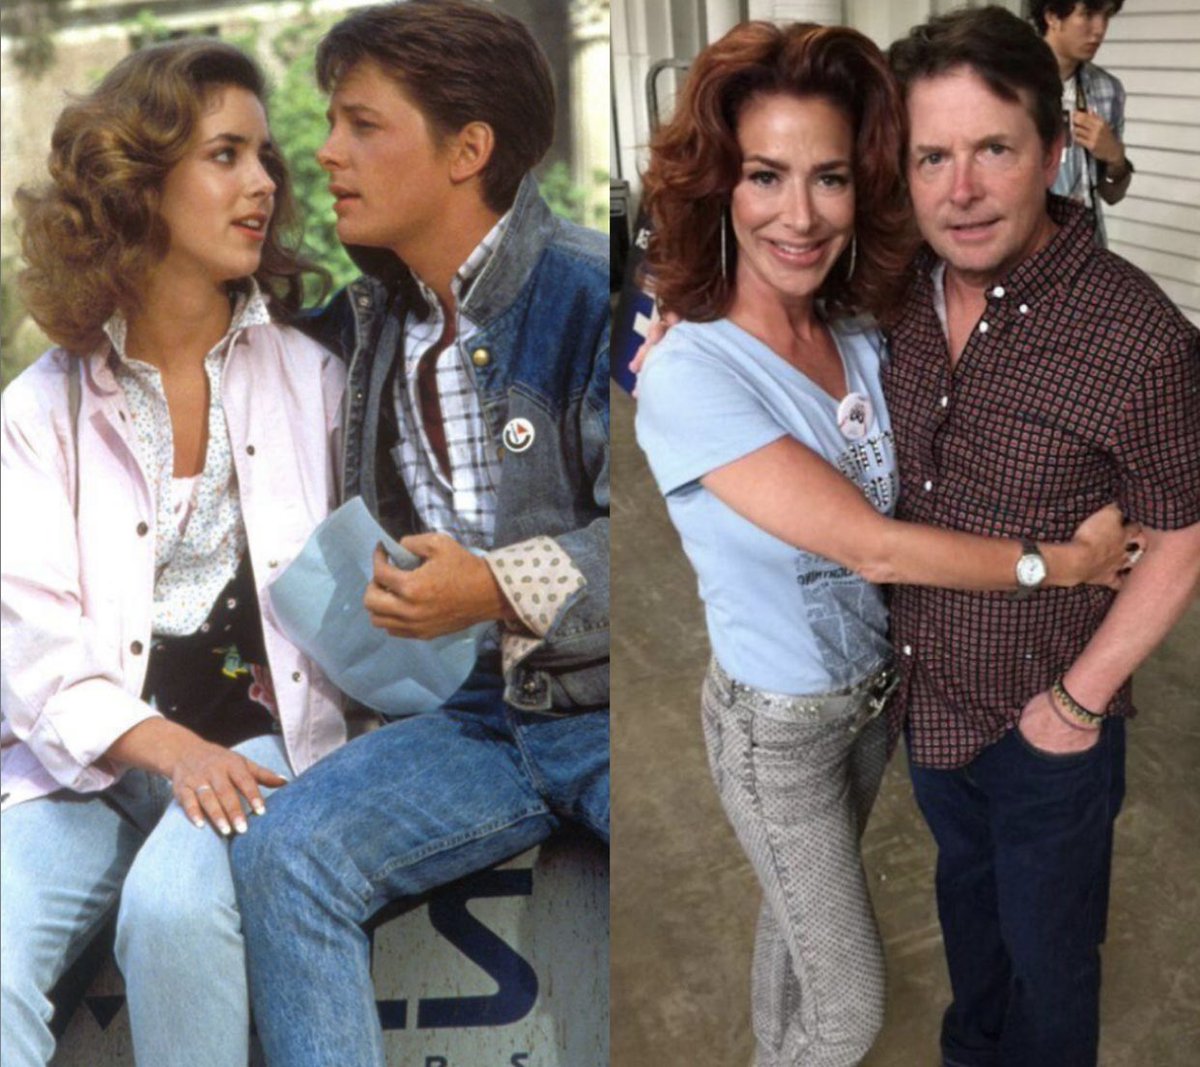 Jennifer and Marty Then.  
Claudia and Michael Now.

#BackToTheFuture #BTTF #MartyMcFly #ClaudiaWells #JenniferParker #80sMovies